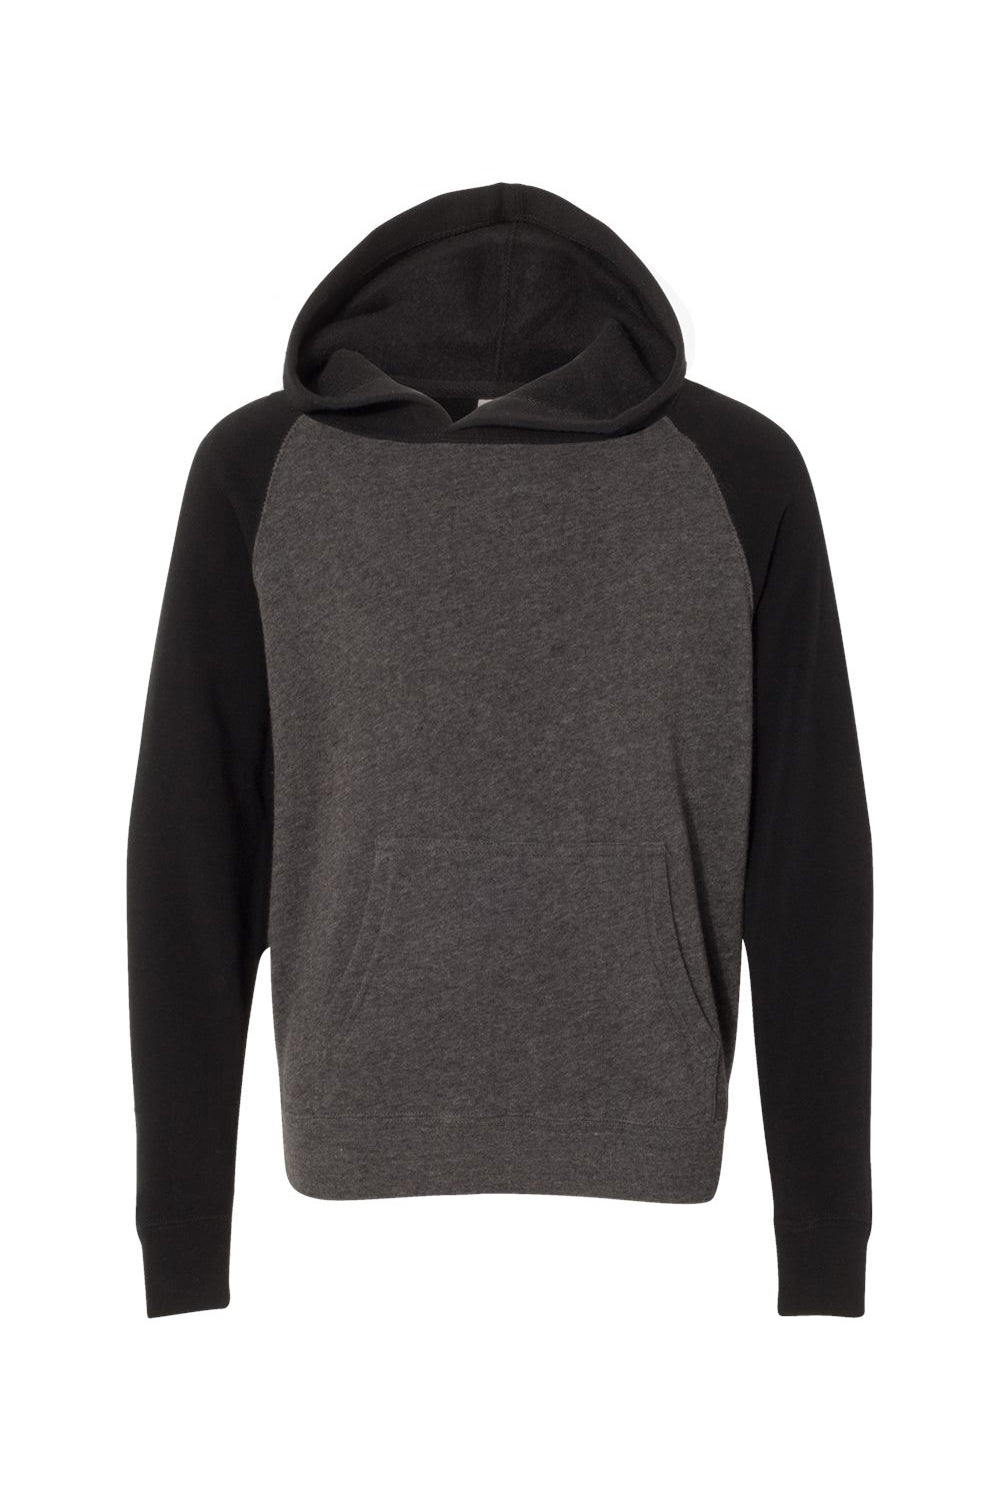 Independent Trading Co. PRM15YSB Youth Special Blend Raglan Hooded Sweatshirt Hoodie Carbon Grey/Black Flat Front